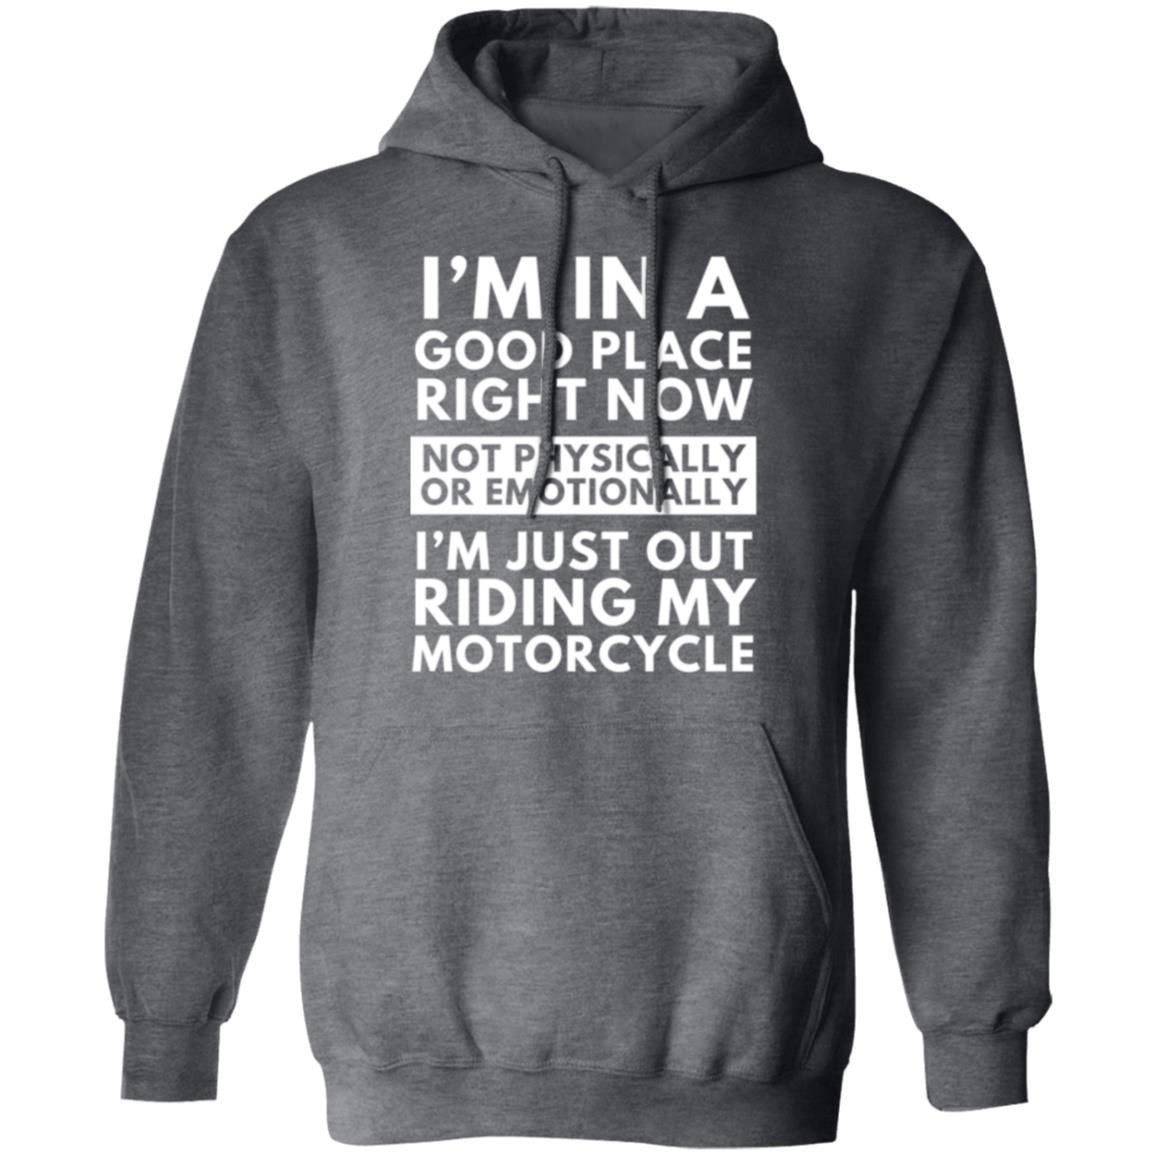 I'm in a Good Place right now, Motorcycle - Pullover Hoodie